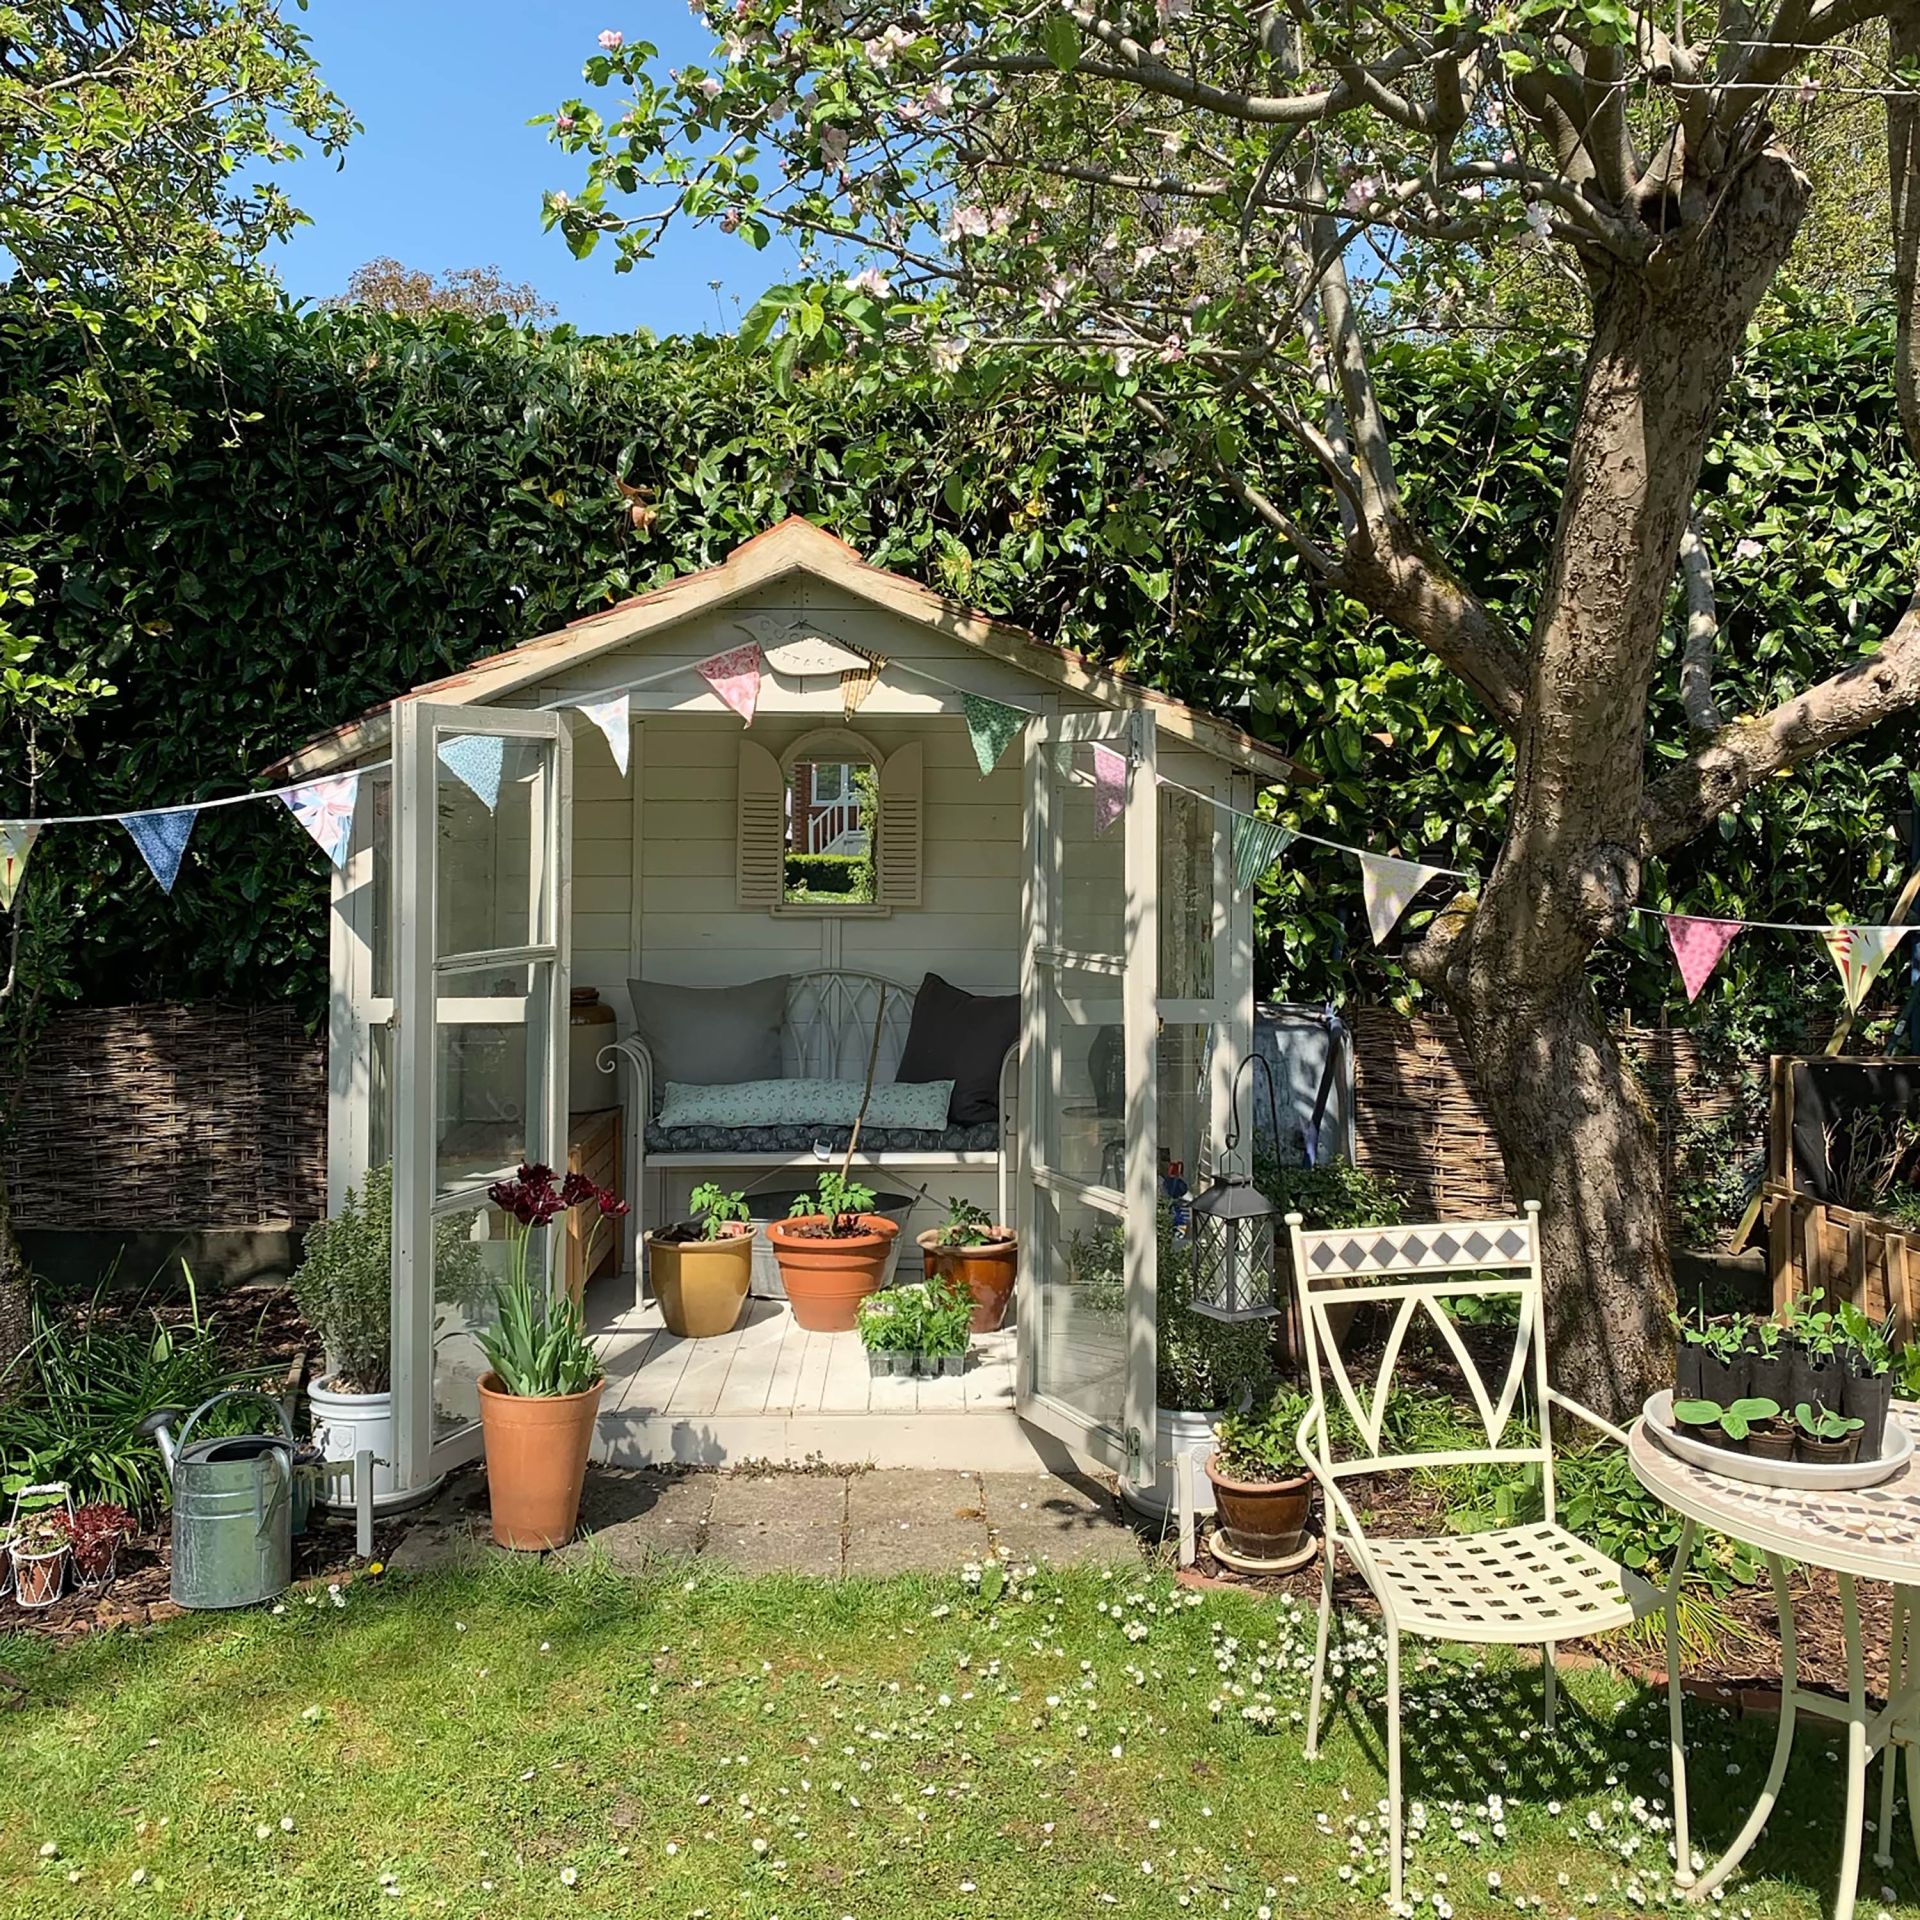 She shed ideas: 30 ways to create a gorgeous garden hideaway